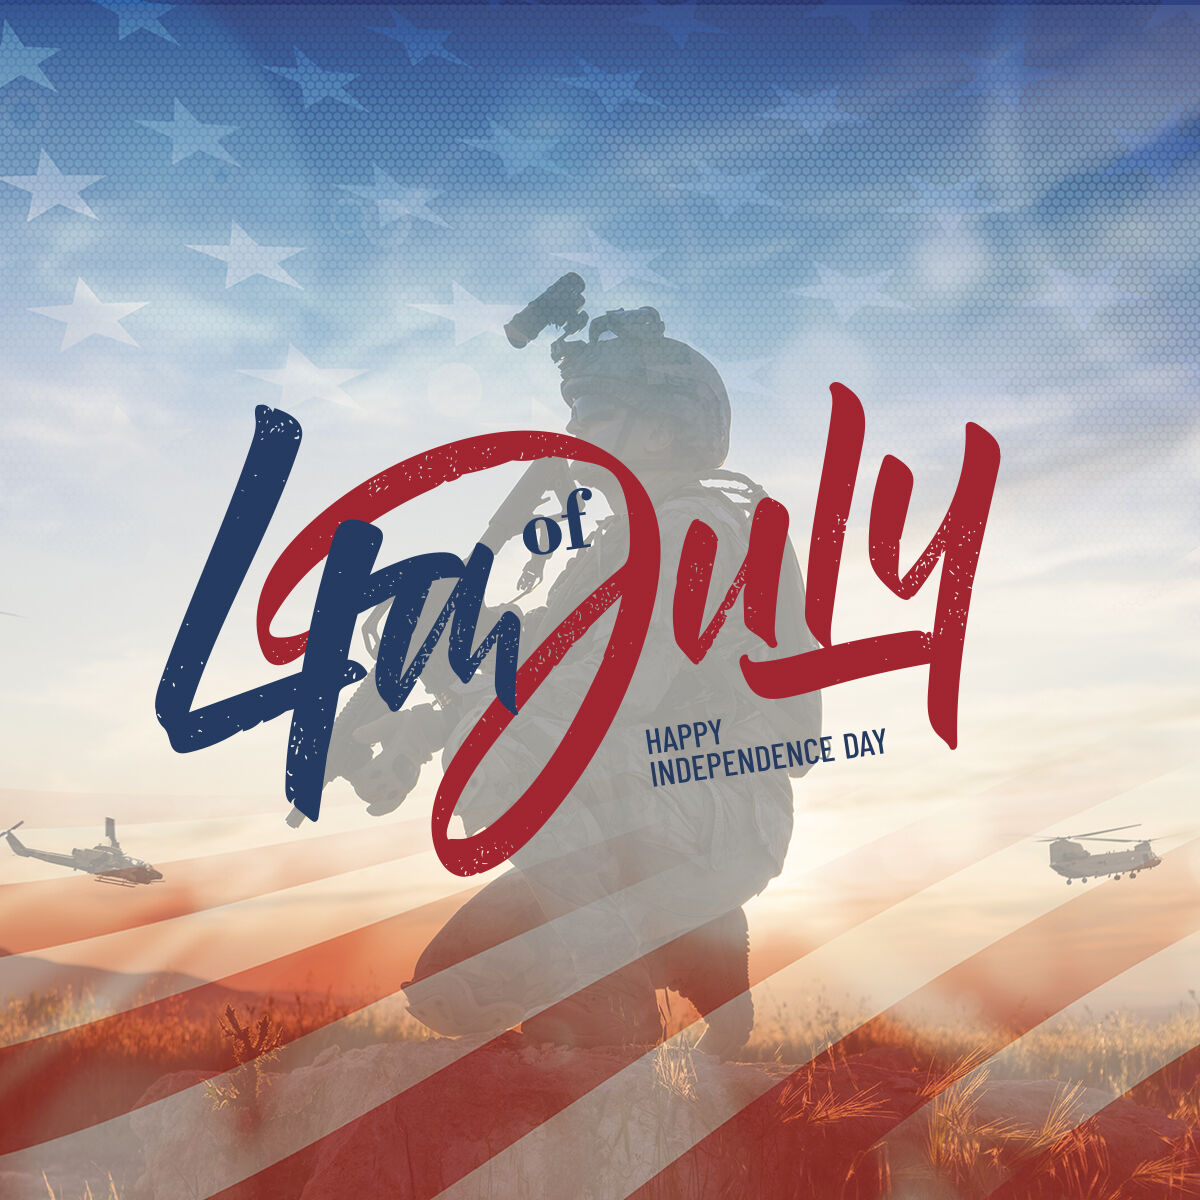 4th of july, happy independence day" text over a background featuring a silhouette of a soldier, helicopters, and an overlay of the american flag — all coming together seamlessly like an auto draft design.